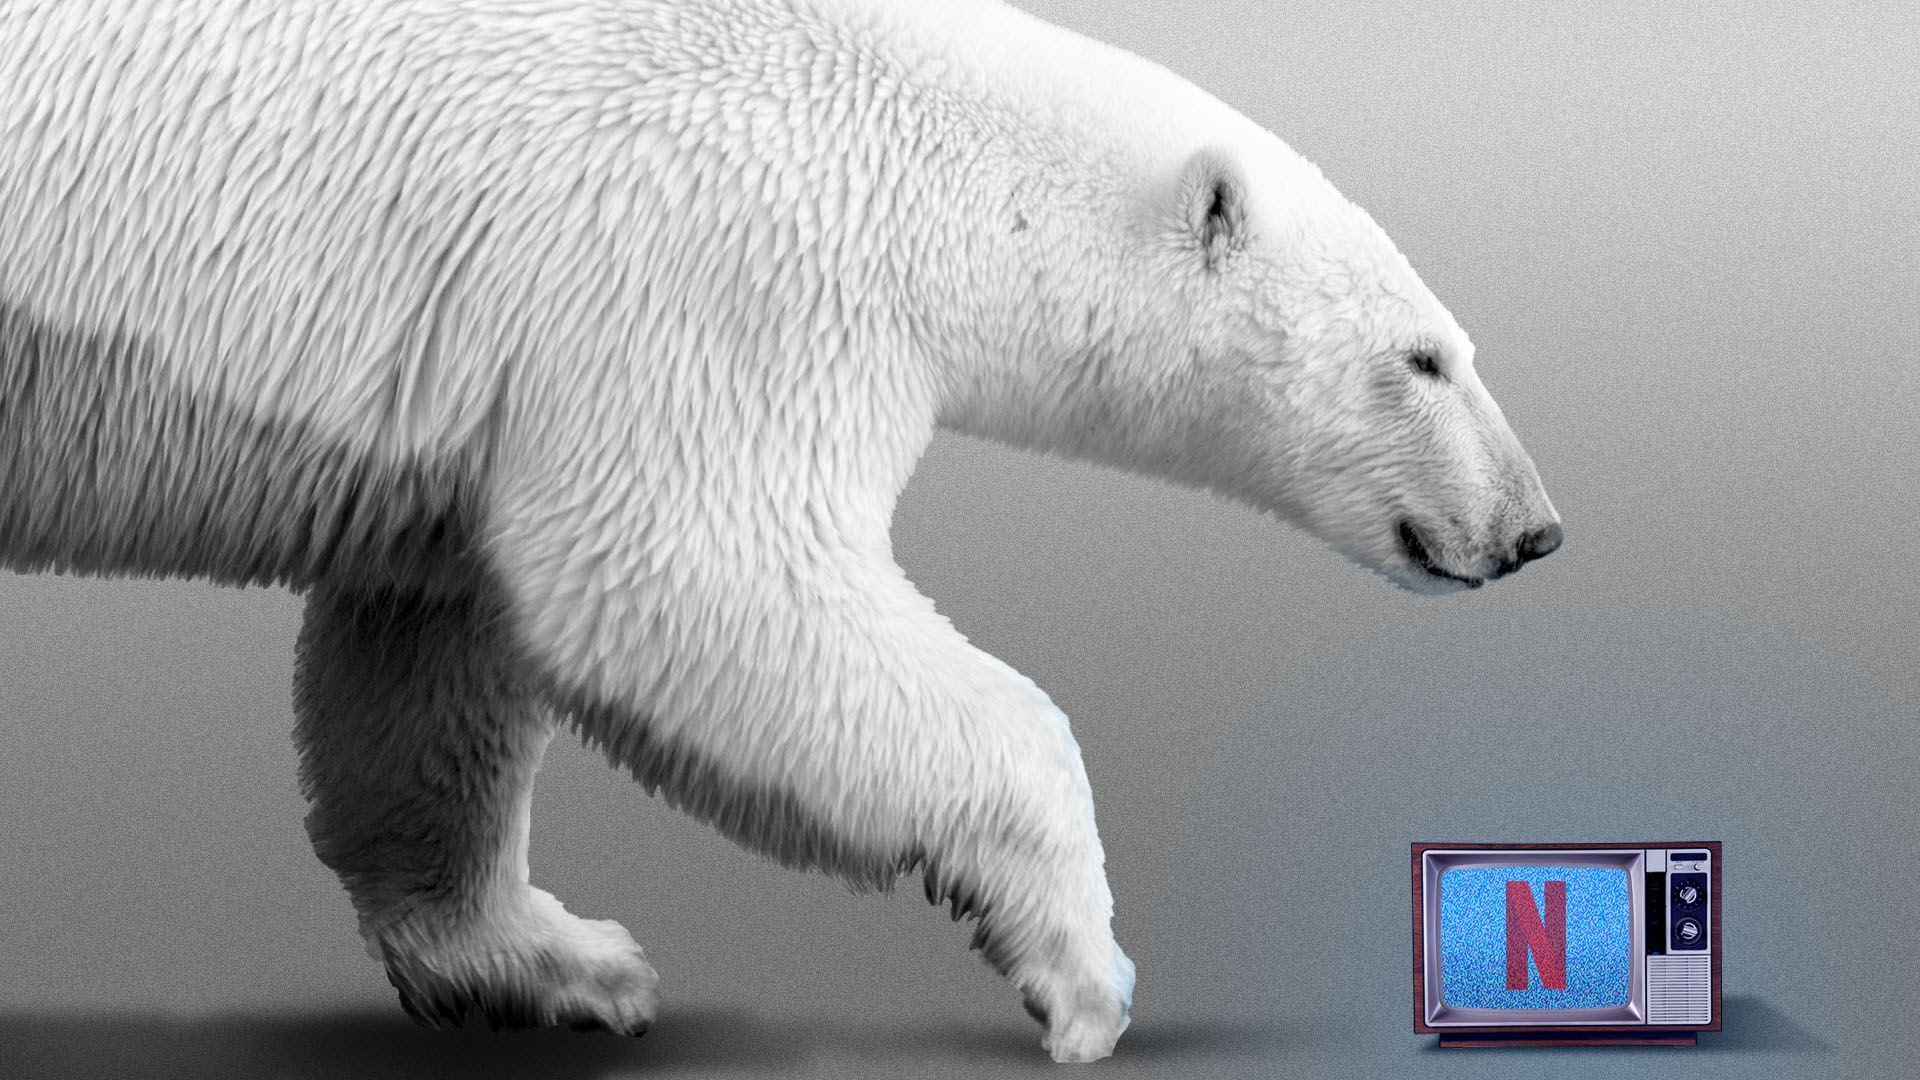 Illustration of polar bear walking in front of a TV with the Neftlix logo